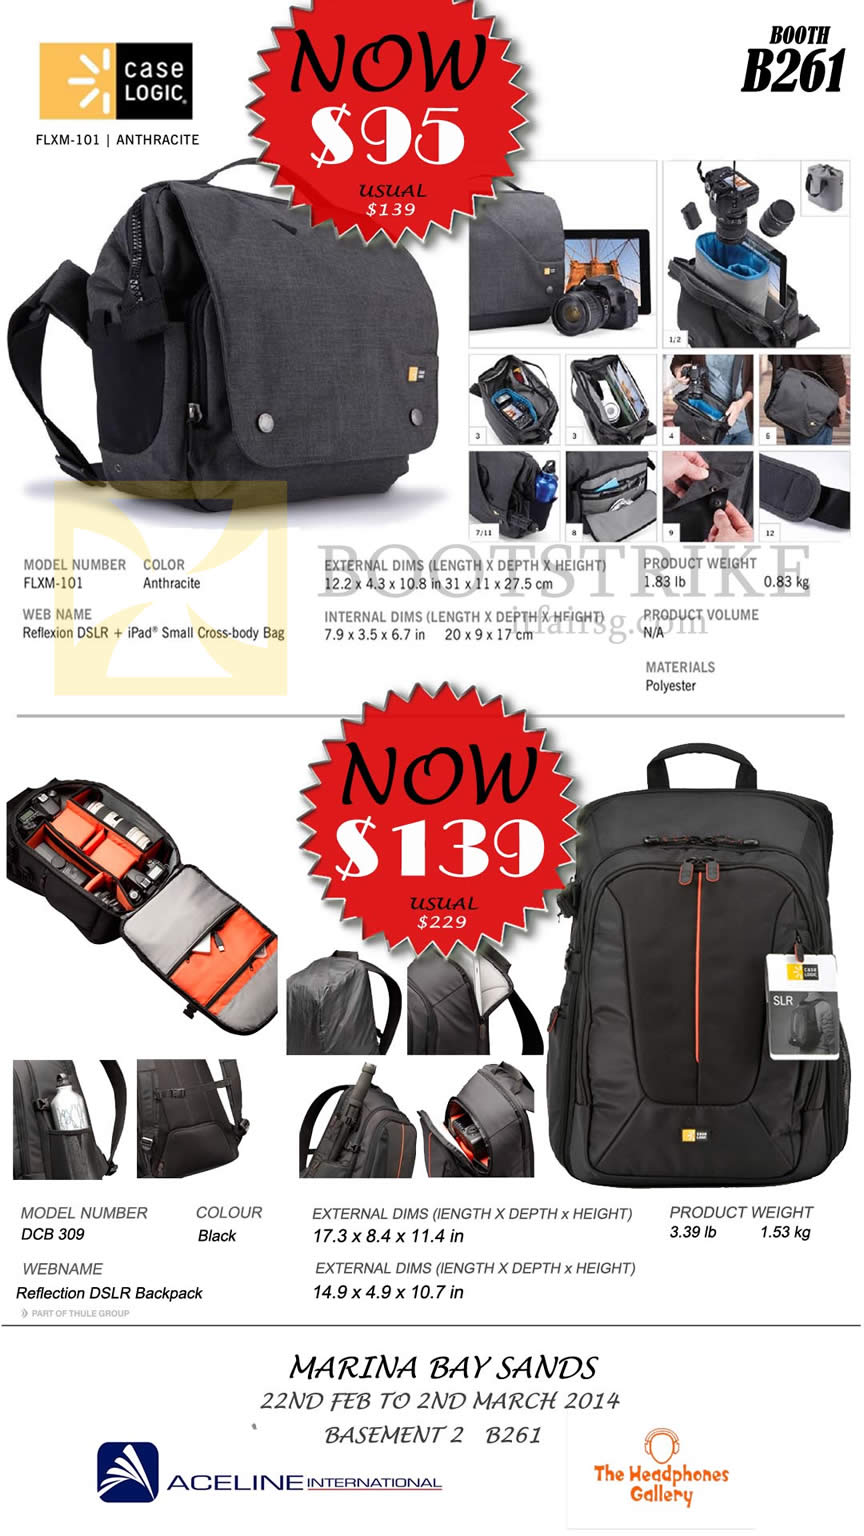 IT SHOW 2014 price list image brochure of The Headphones Gallery Case Logic Bags Anthracite Reflexion, Reflection